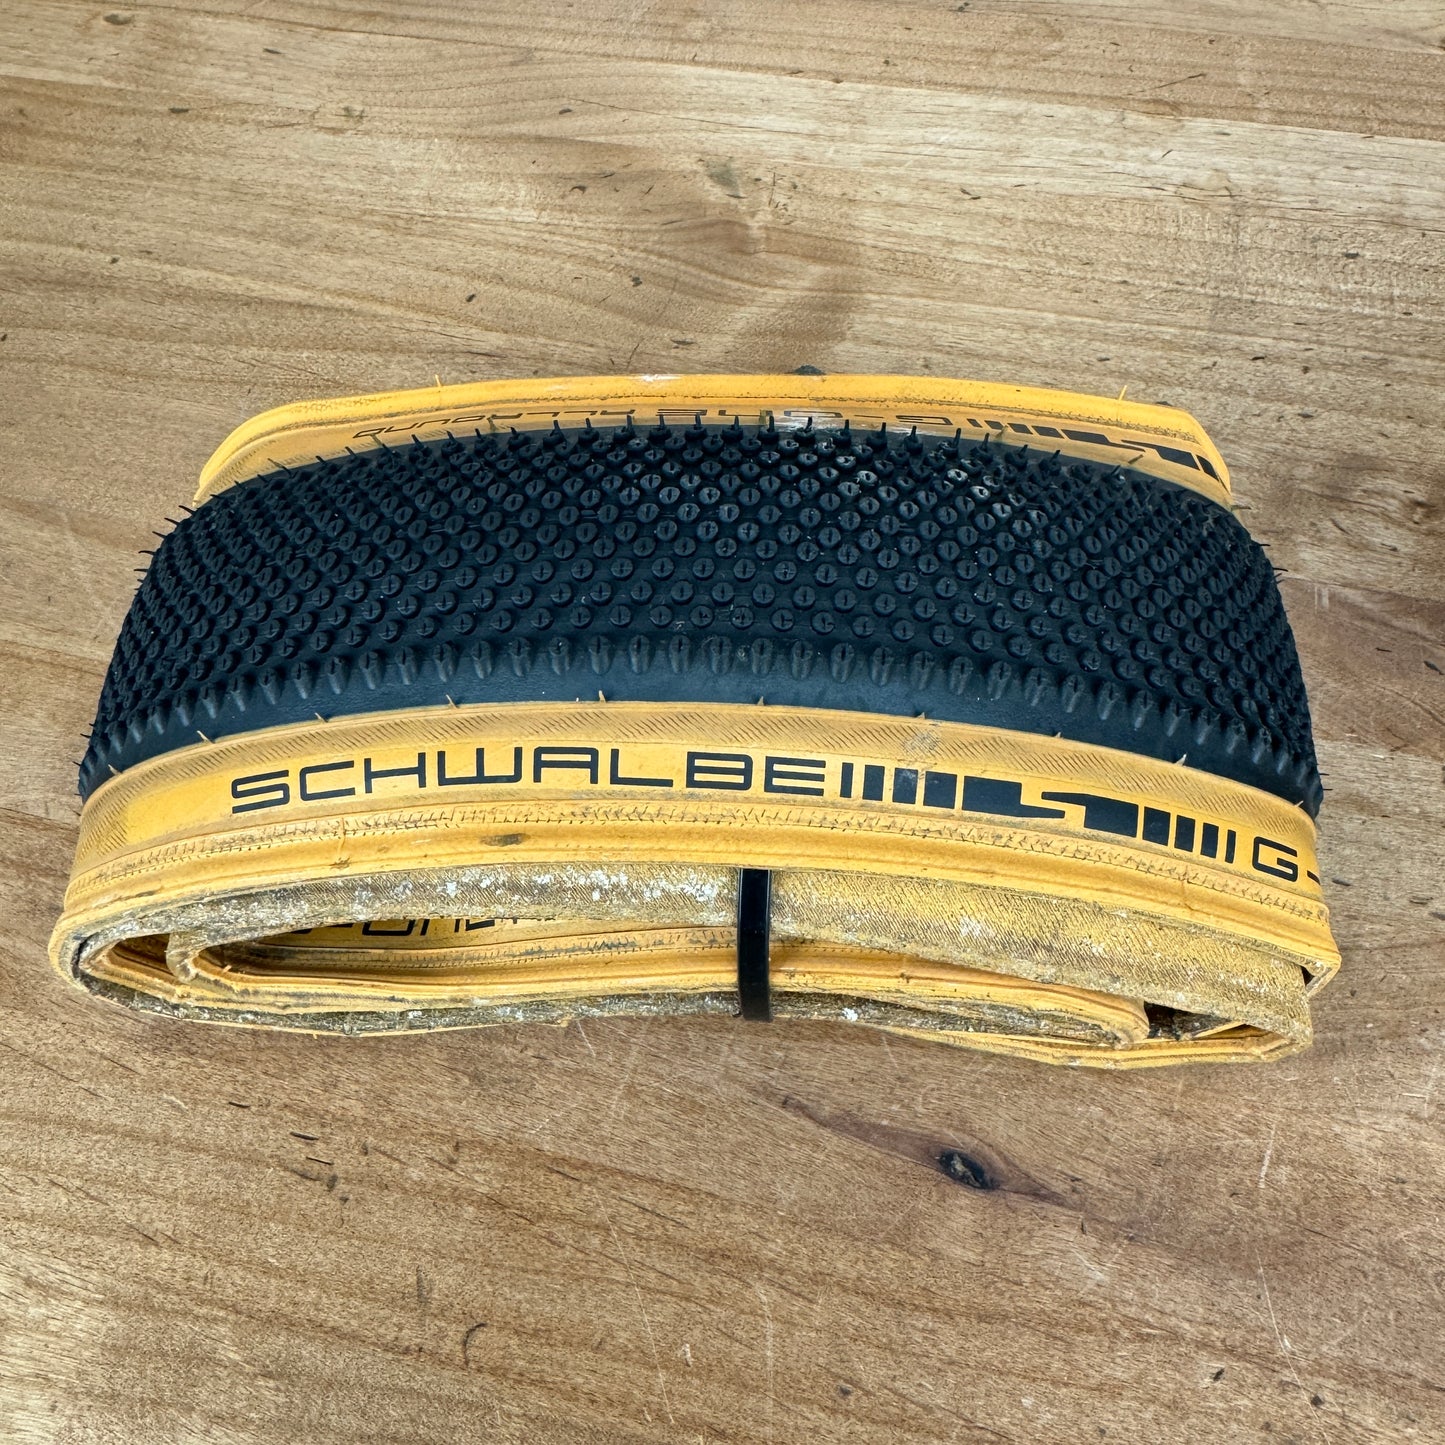 Light Wear Pair Schwalbe G-One Allround TLE 700c x 40mm Tanwall Bike Tires